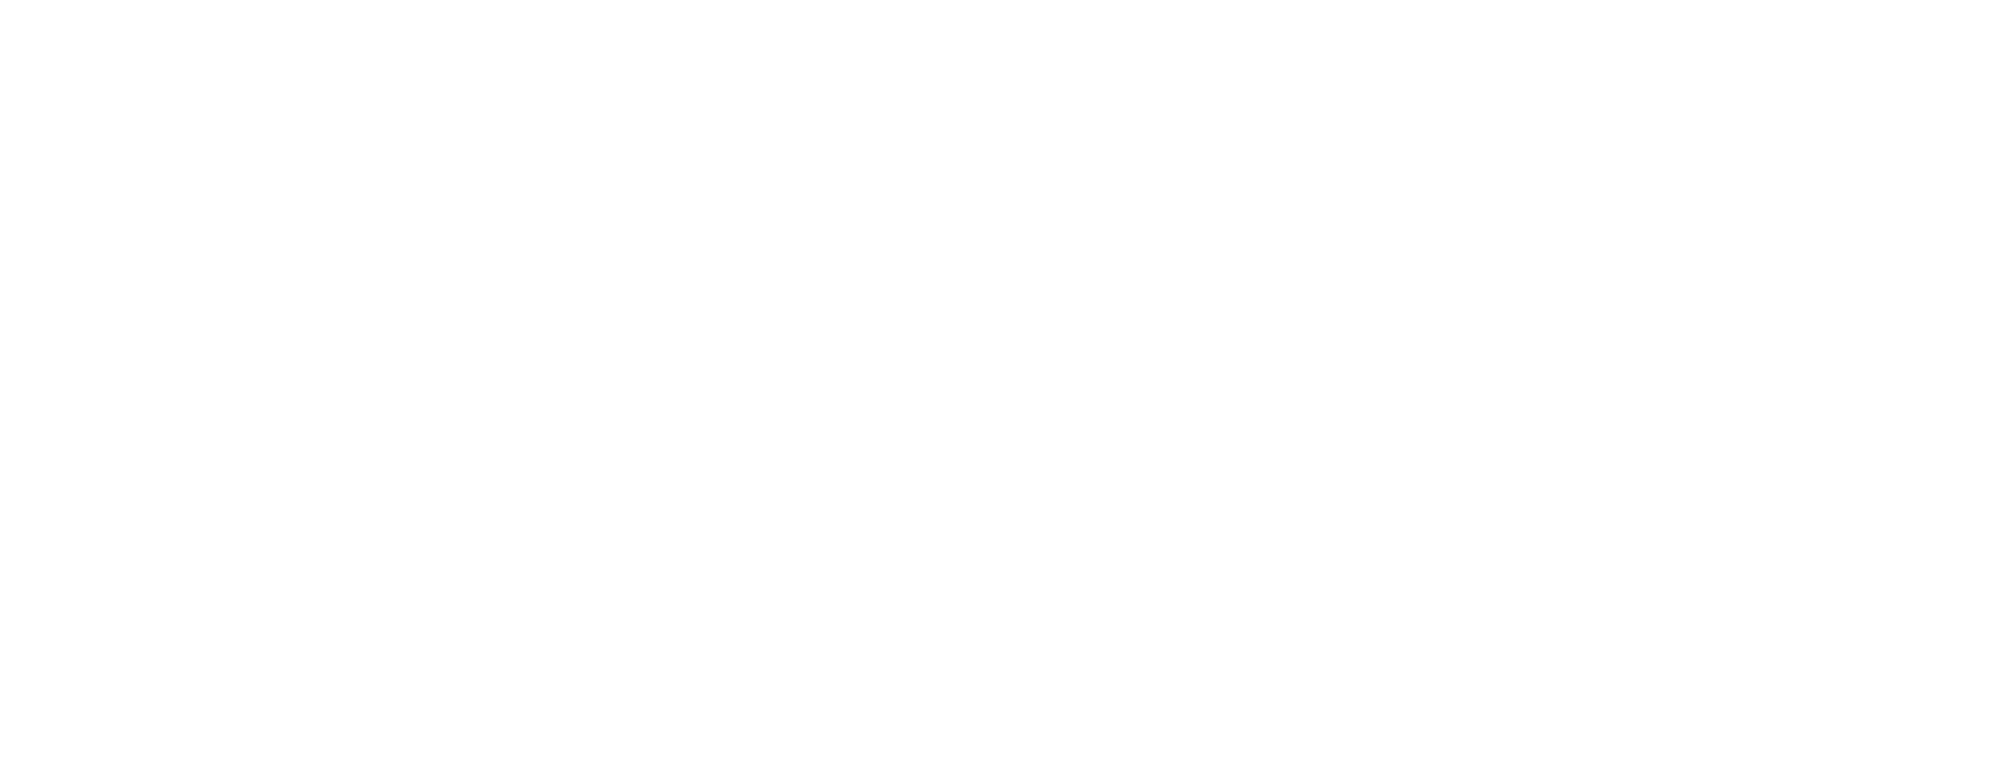 OpenFF Toolkit 0.10.7+0.g274a1159.dirty documentation logo